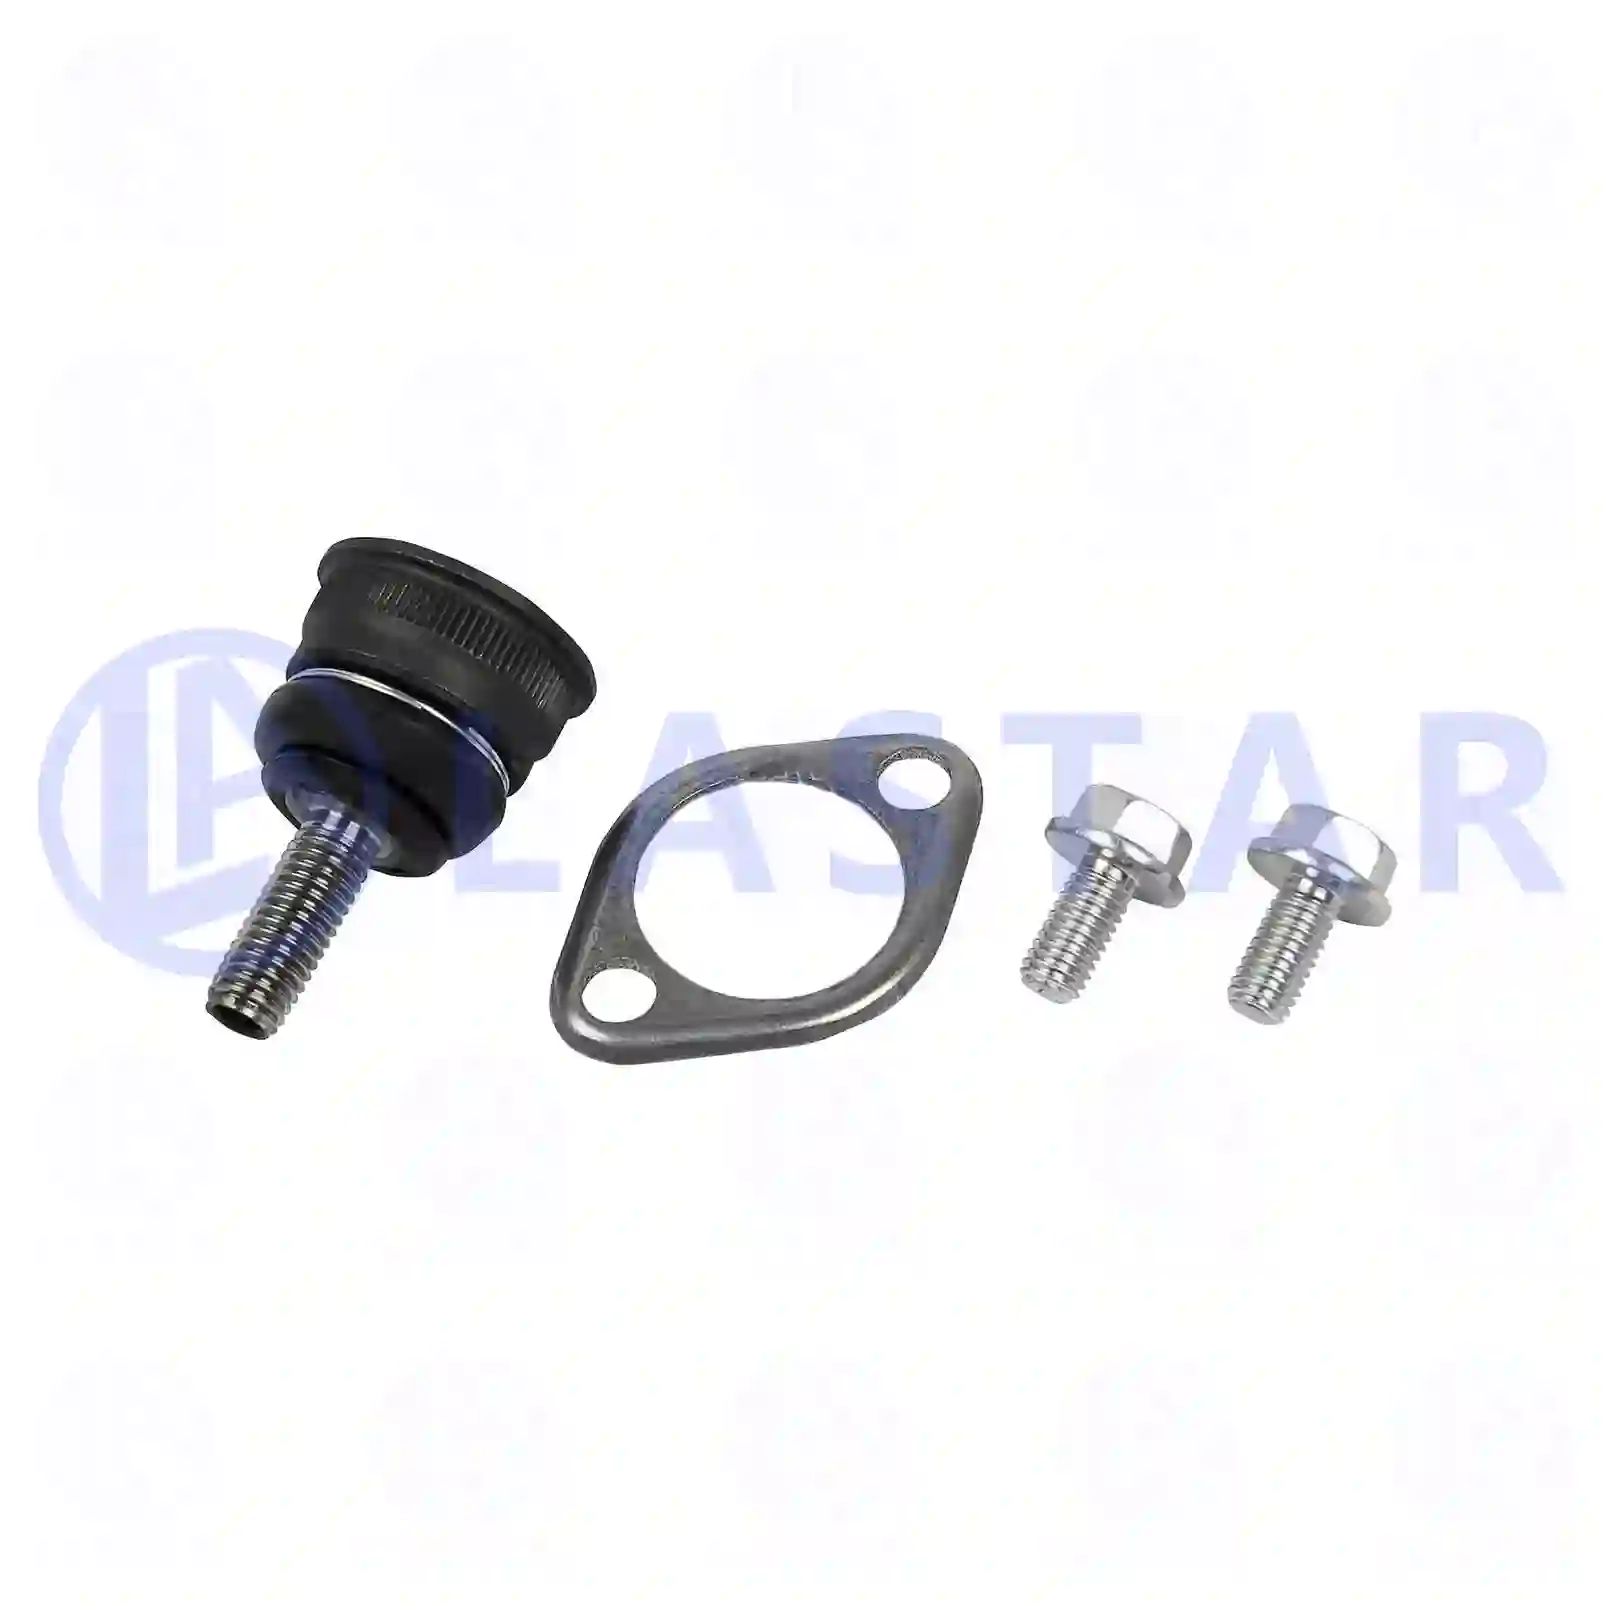 Ball joint, 77733242, 1356022, 1384624, 550268, ZG40128-0008 ||  77733242 Lastar Spare Part | Truck Spare Parts, Auotomotive Spare Parts Ball joint, 77733242, 1356022, 1384624, 550268, ZG40128-0008 ||  77733242 Lastar Spare Part | Truck Spare Parts, Auotomotive Spare Parts